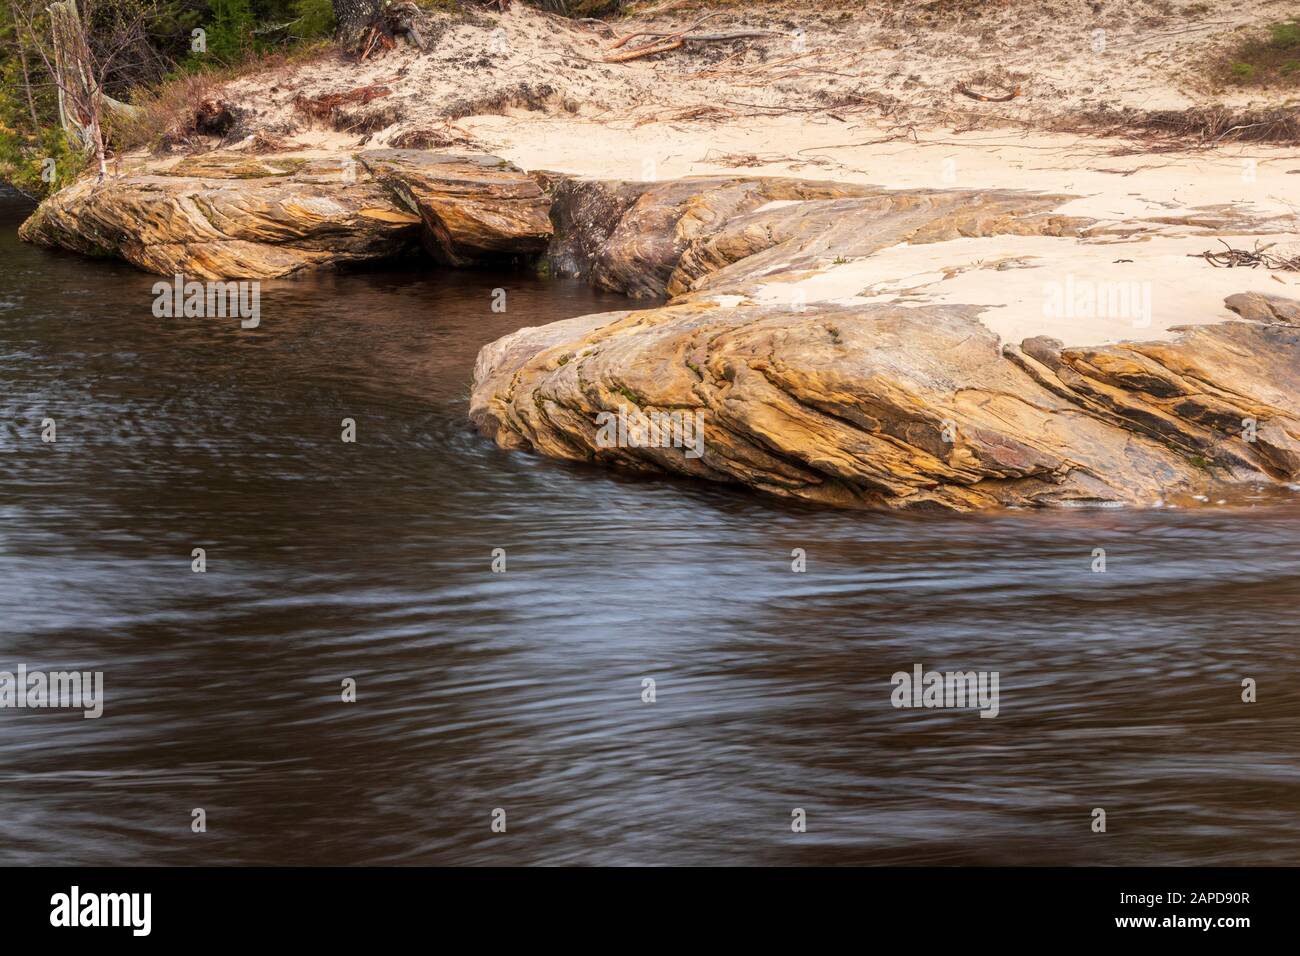 Aktueller Passing Carved Rock Outcropping am Miners Beach, Munising, Michigan Stockfoto